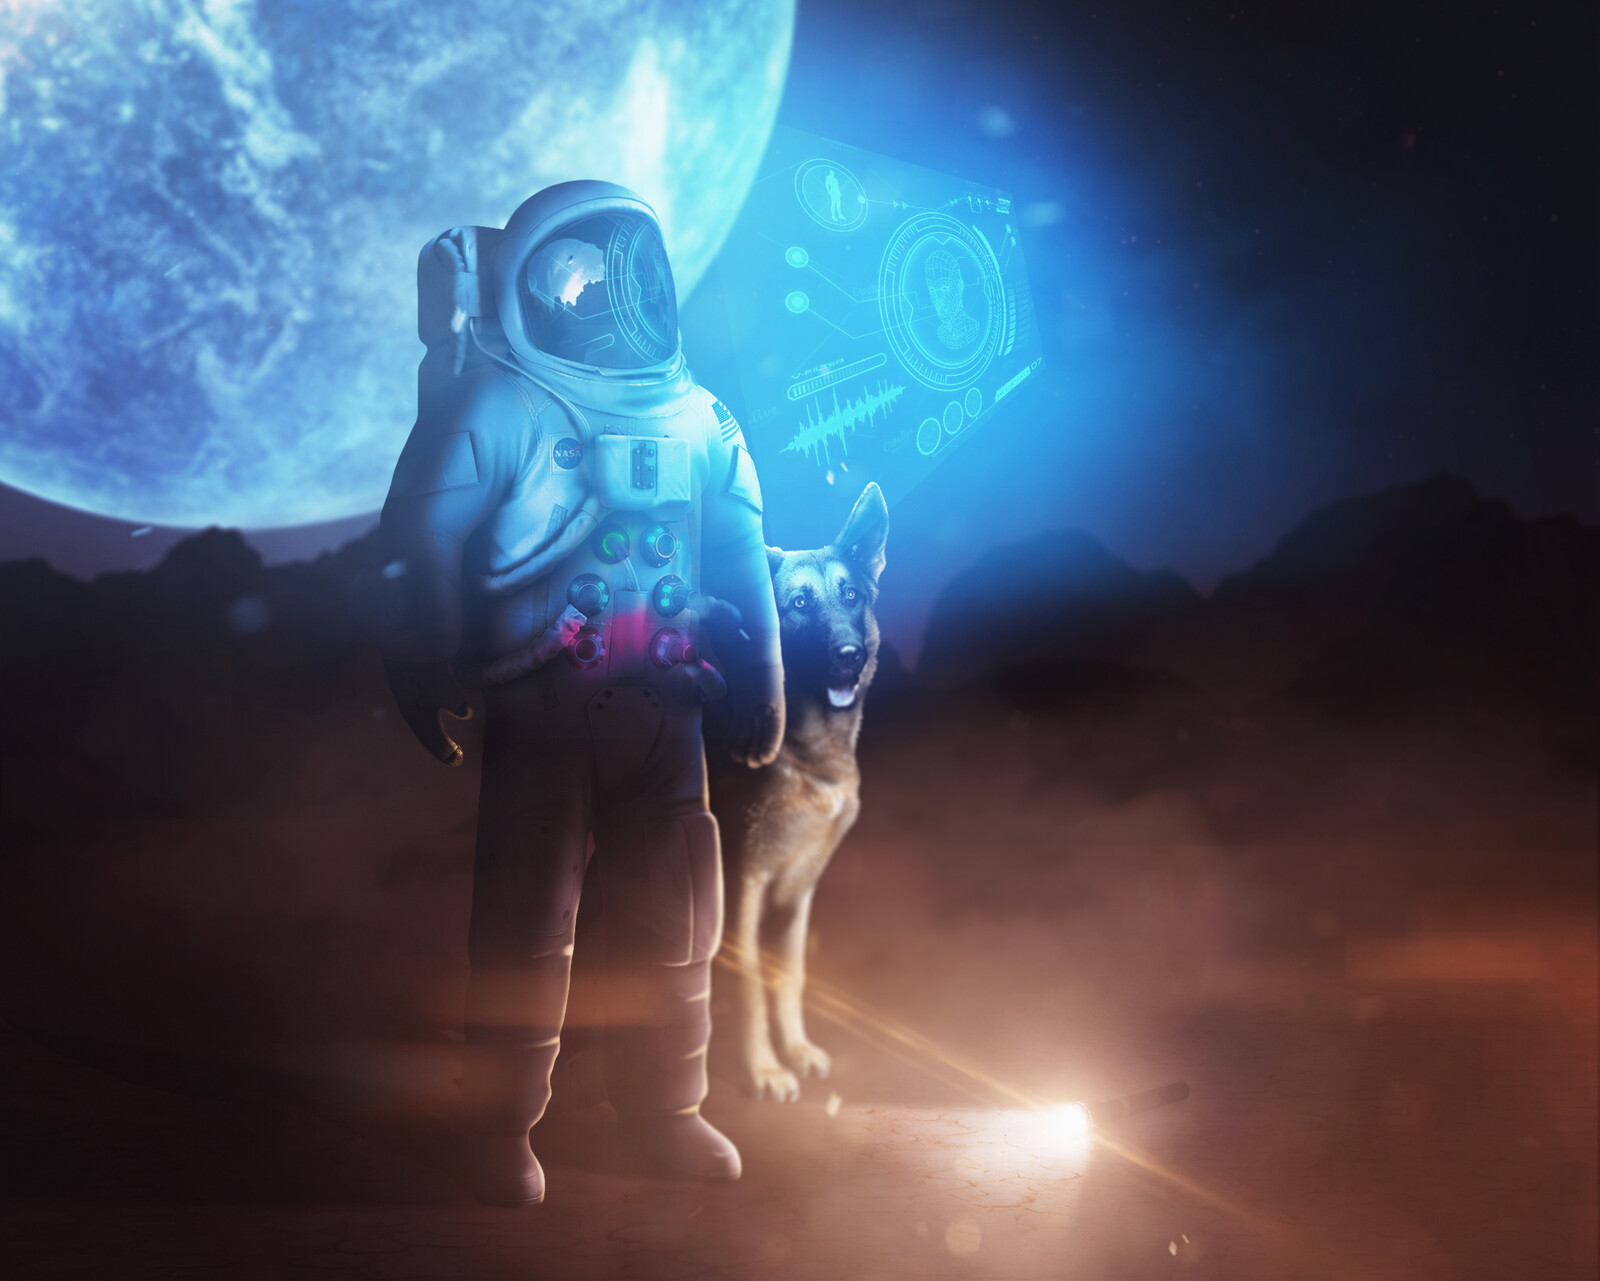 Astronaut and dog